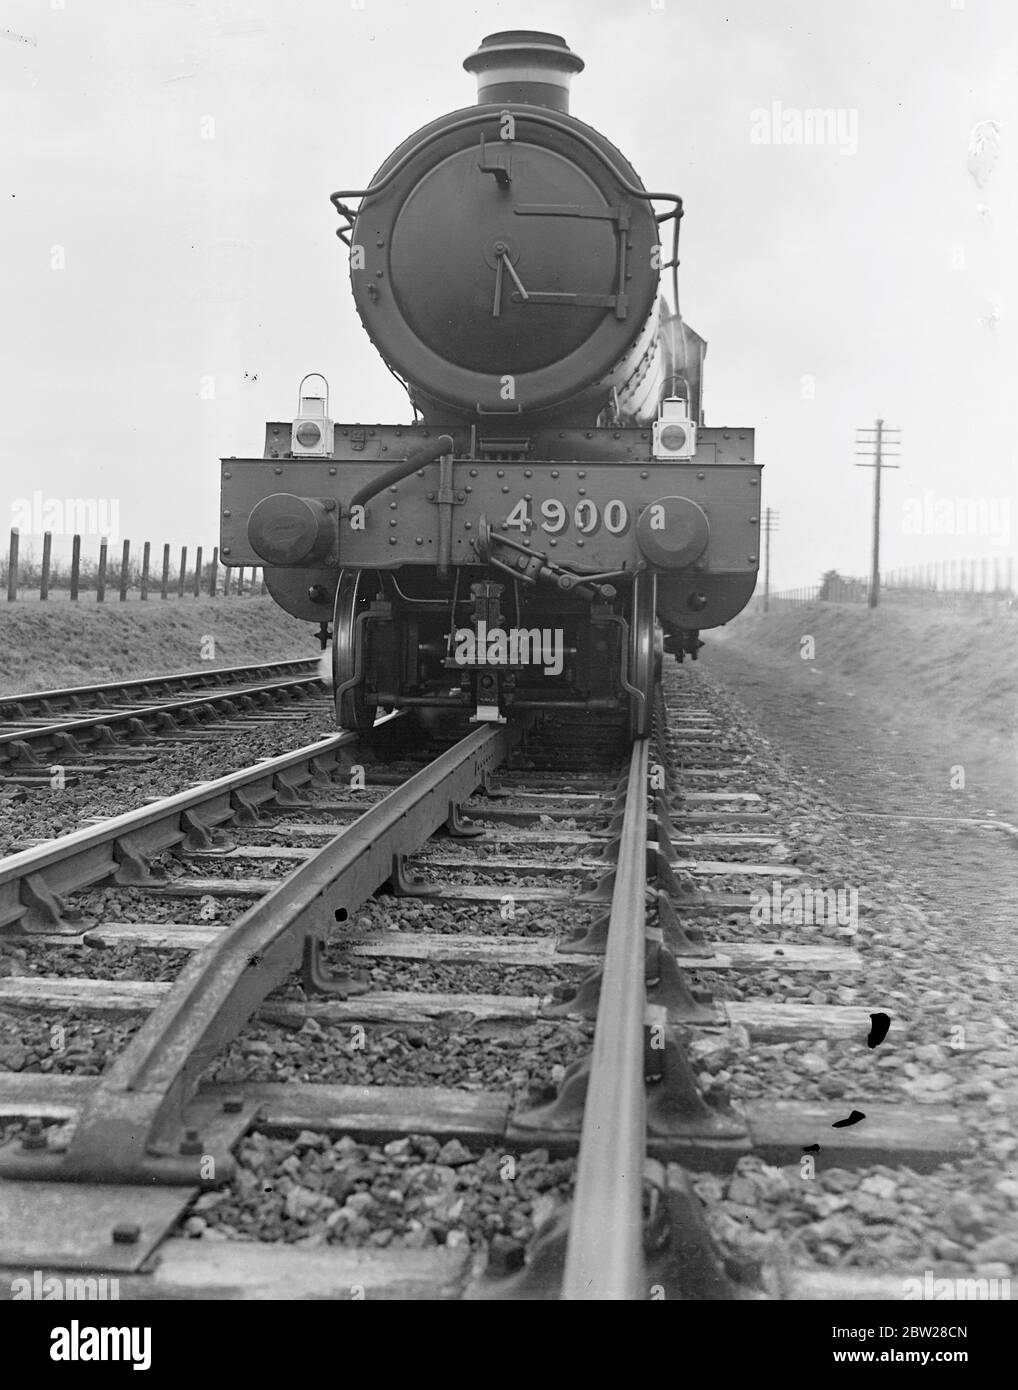 Britain's railways overcome the fog menace - audible signals warned driver and apply brakes. A device, invented by members of the railway staff, which gives audible warning to the drivers, has been installed as a safety aid on the Great Western Railway System in England. If the line is clear a bell rings by the drivers side giving him the right of way. Should the signal be at 'caution' a siren sounds and the brakes are automatically applied throughout the train. And I am sure you fitted beneath the locomotive connects with the ramp and so gives the signal to the driver. By means of this new sa Stock Photo